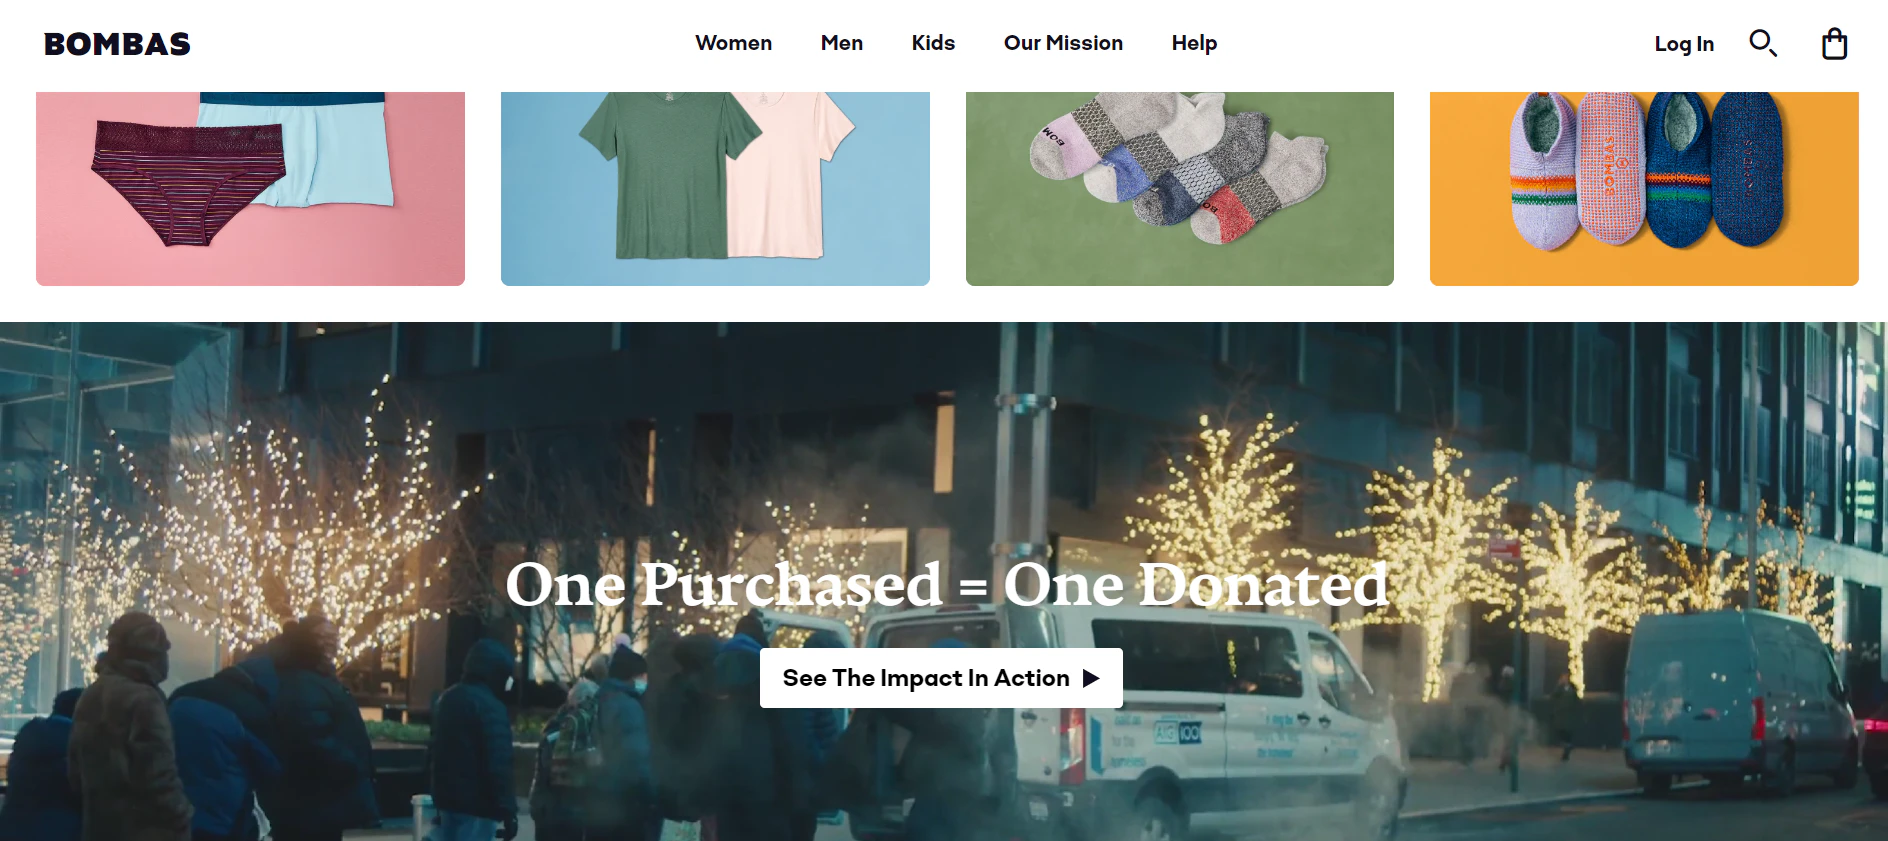 Bombas is a great example shopify store example